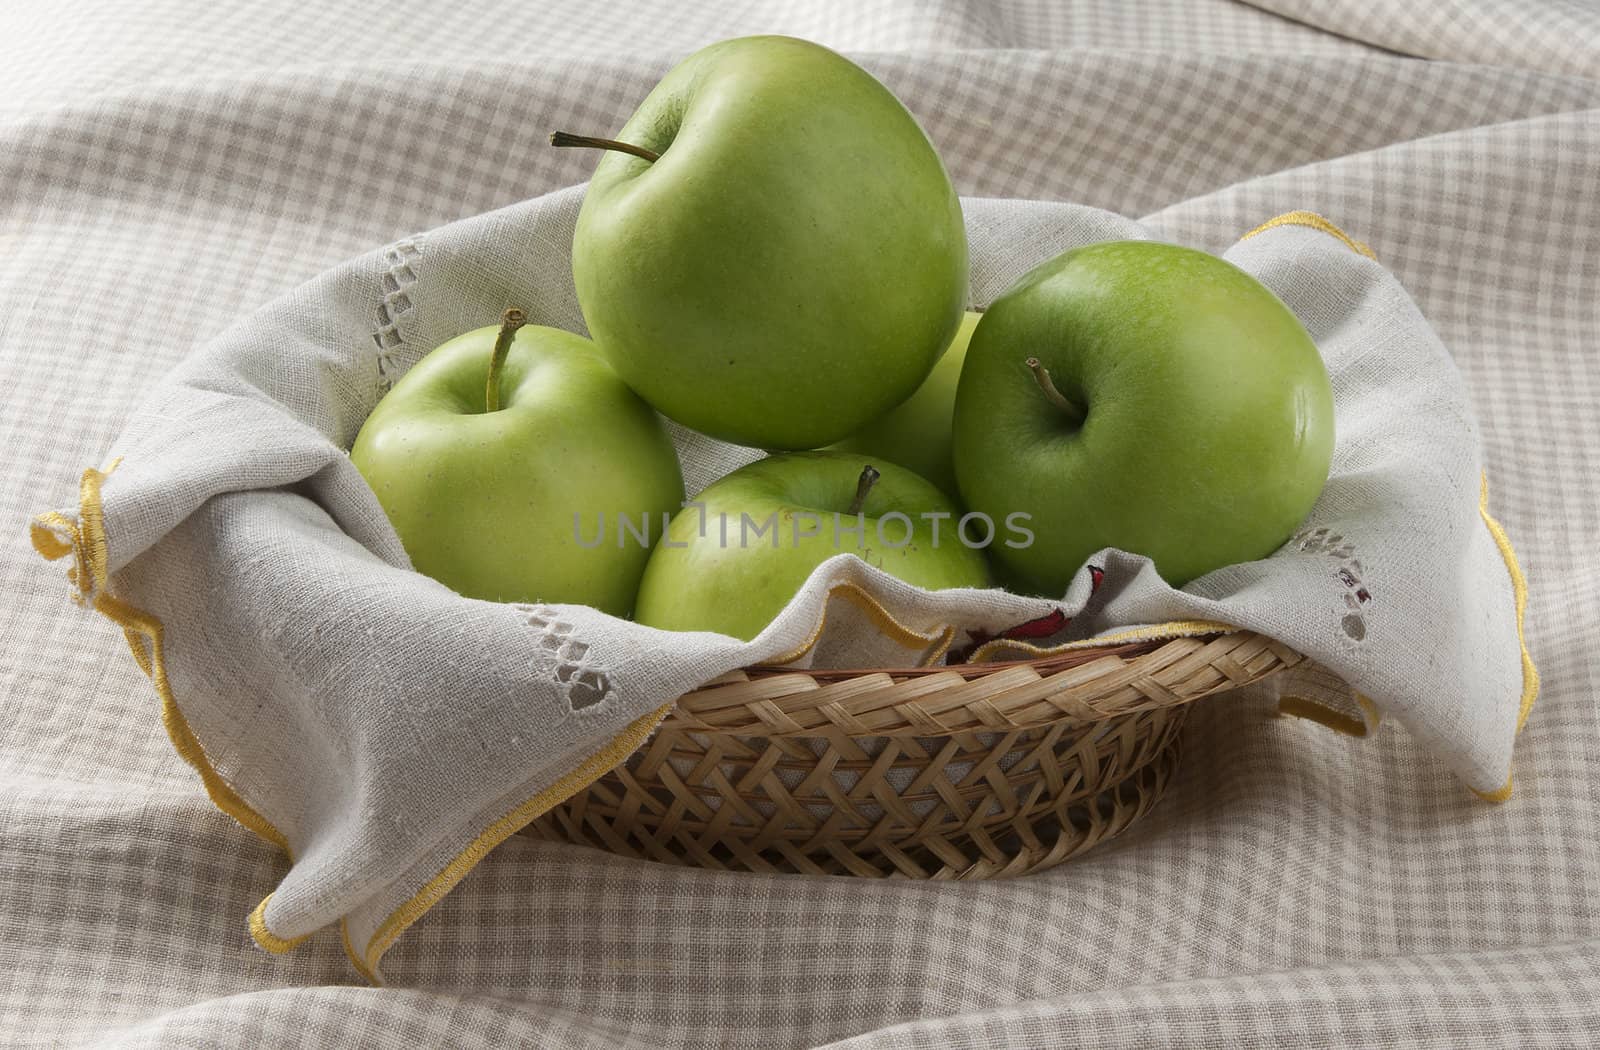 Green apples by Angorius